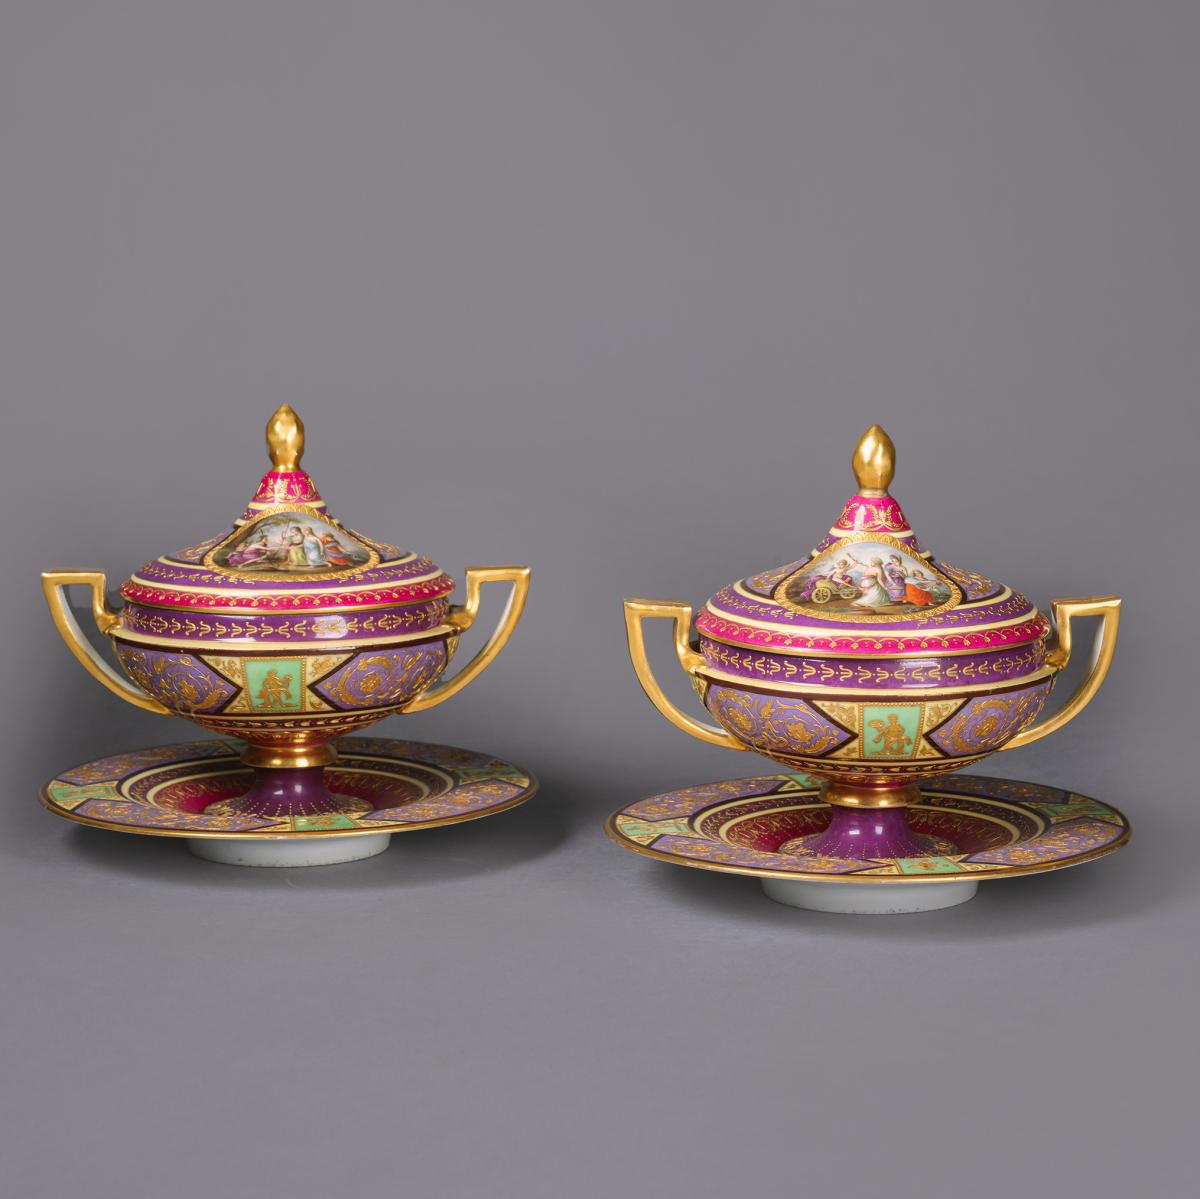 A Pair of Vienna Style Porcelain 'Ecuelles' (Soup Tureens with Covers, on Plates), Austria, Circa 1900.